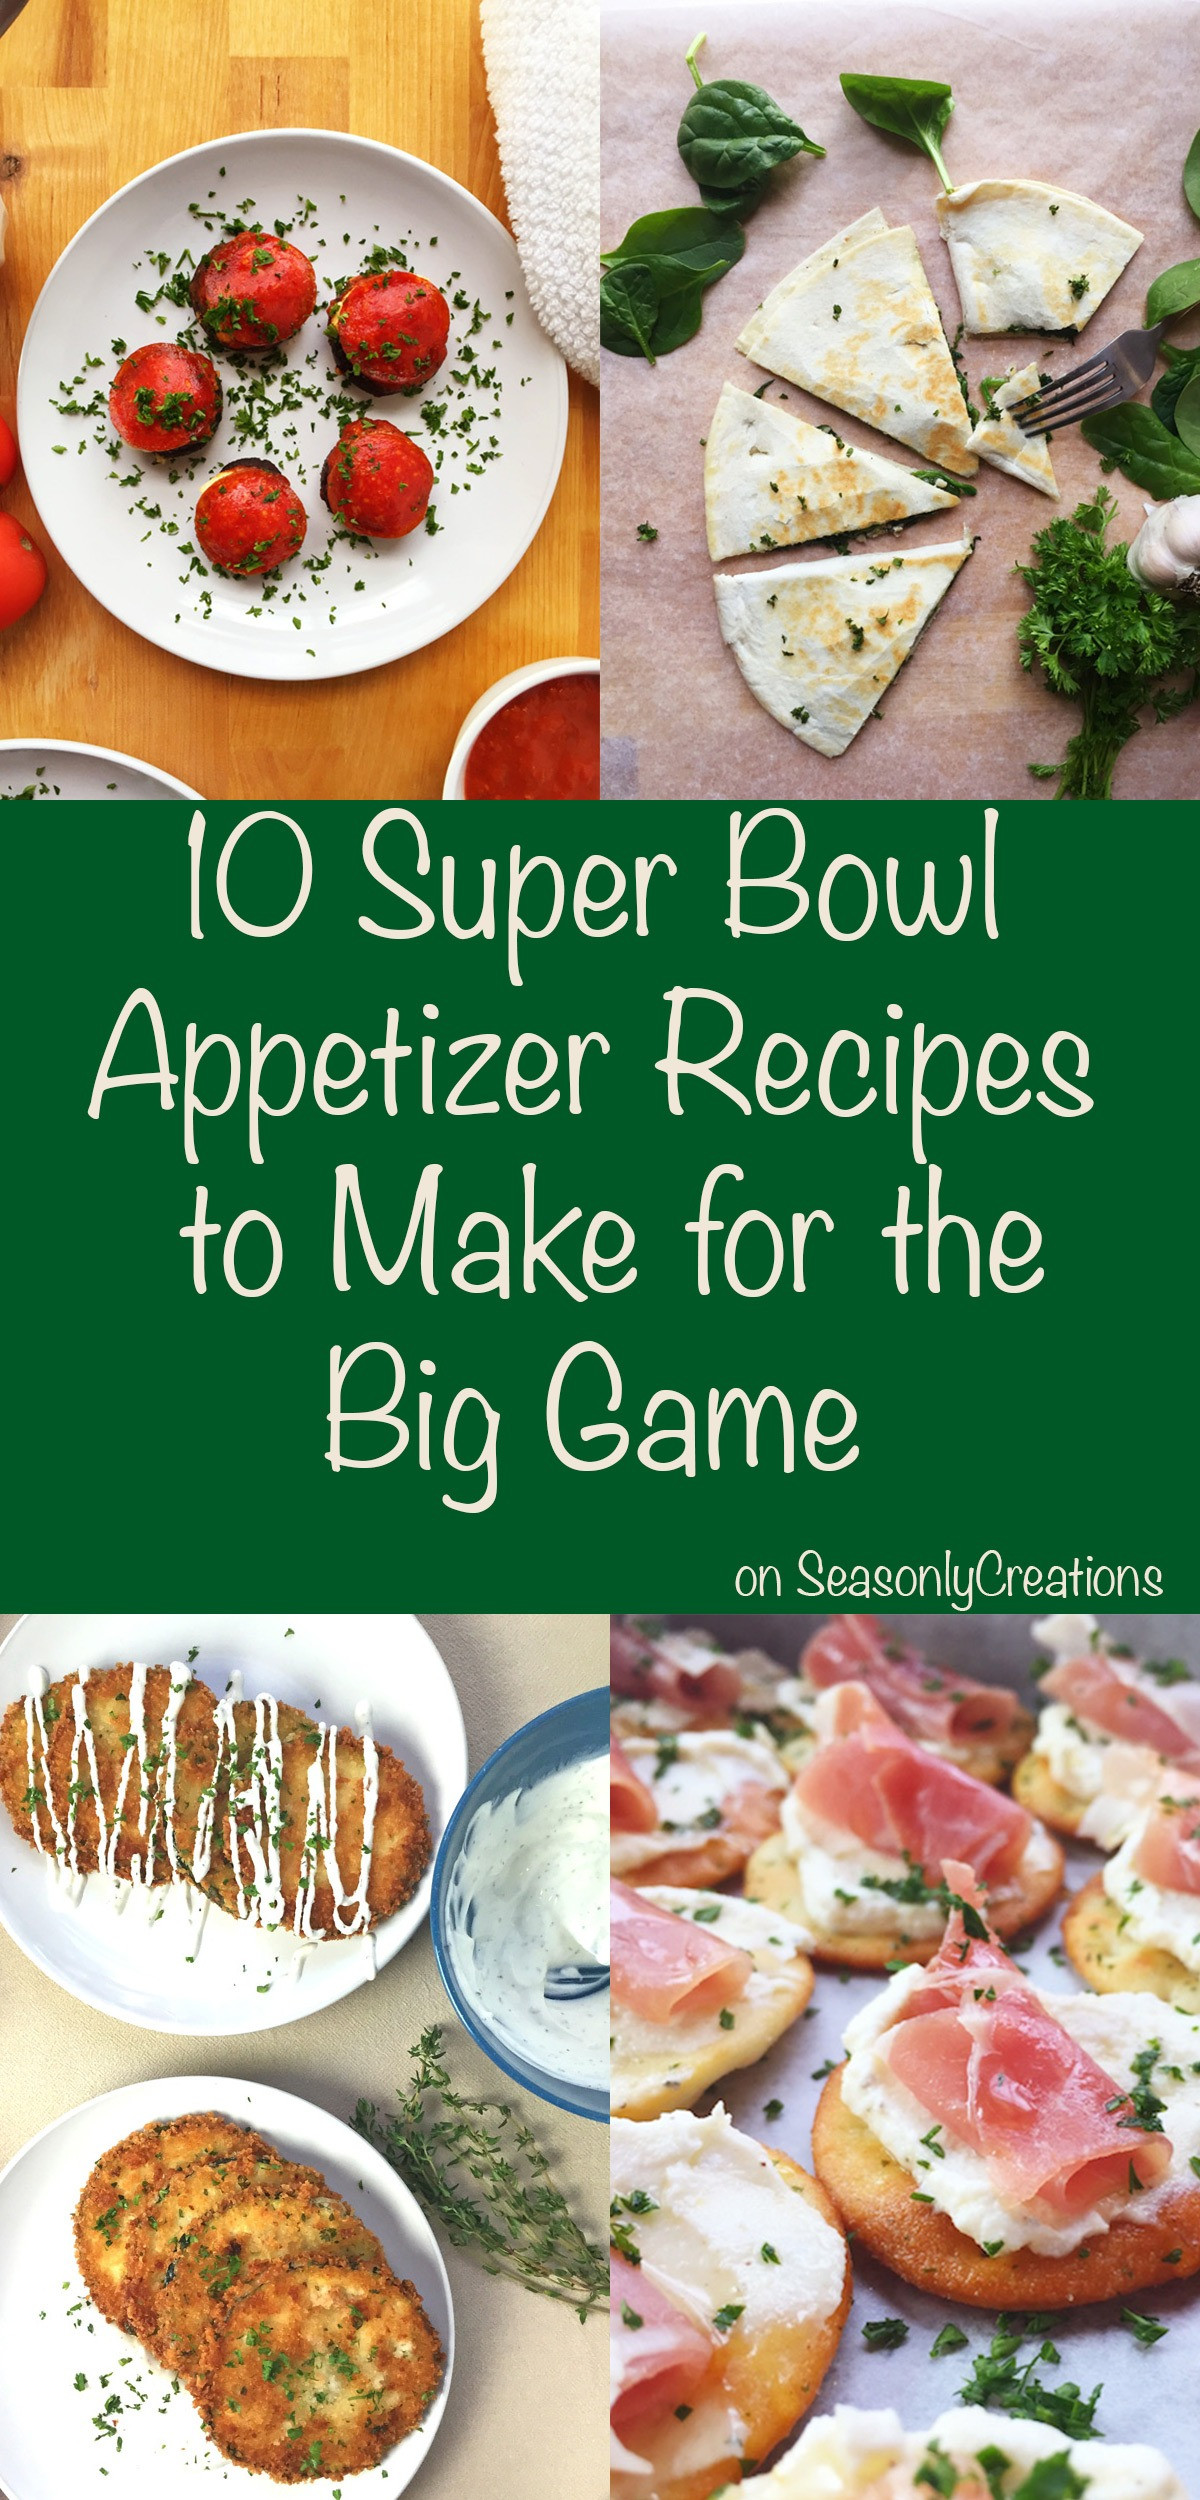 Super Bowl Appetizers Recipes
 10 Super Bowl Appetizer Recipes to Make for the Big Game